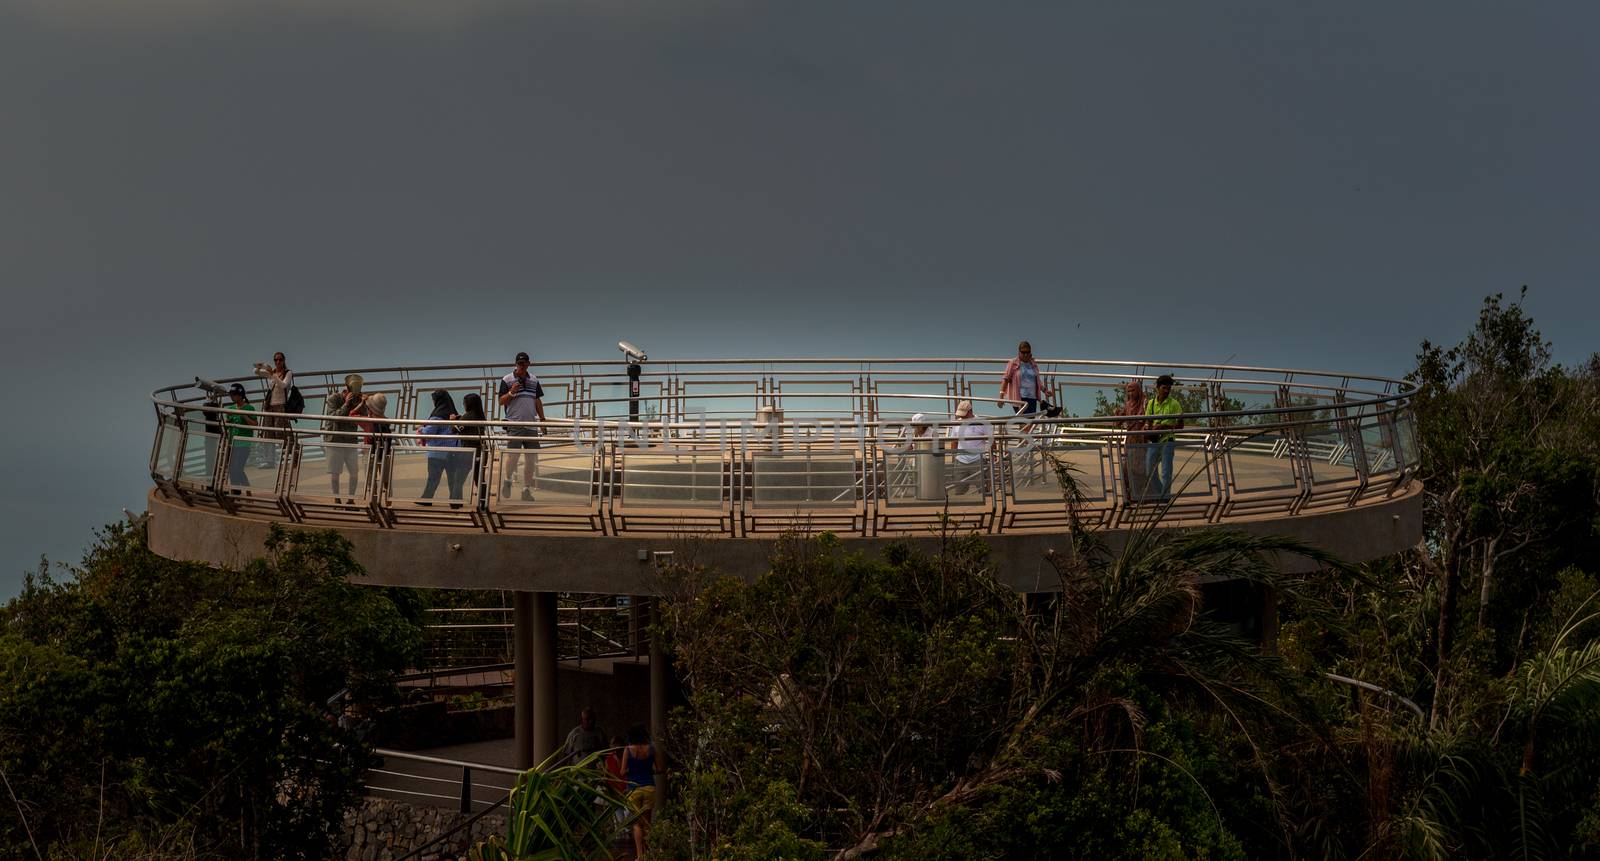 Langkawi, Malaysia -- March 8, 2016. Tourists gather on an Observation Post by the Langkawi Sky Bridge to gaze over their surroundings.